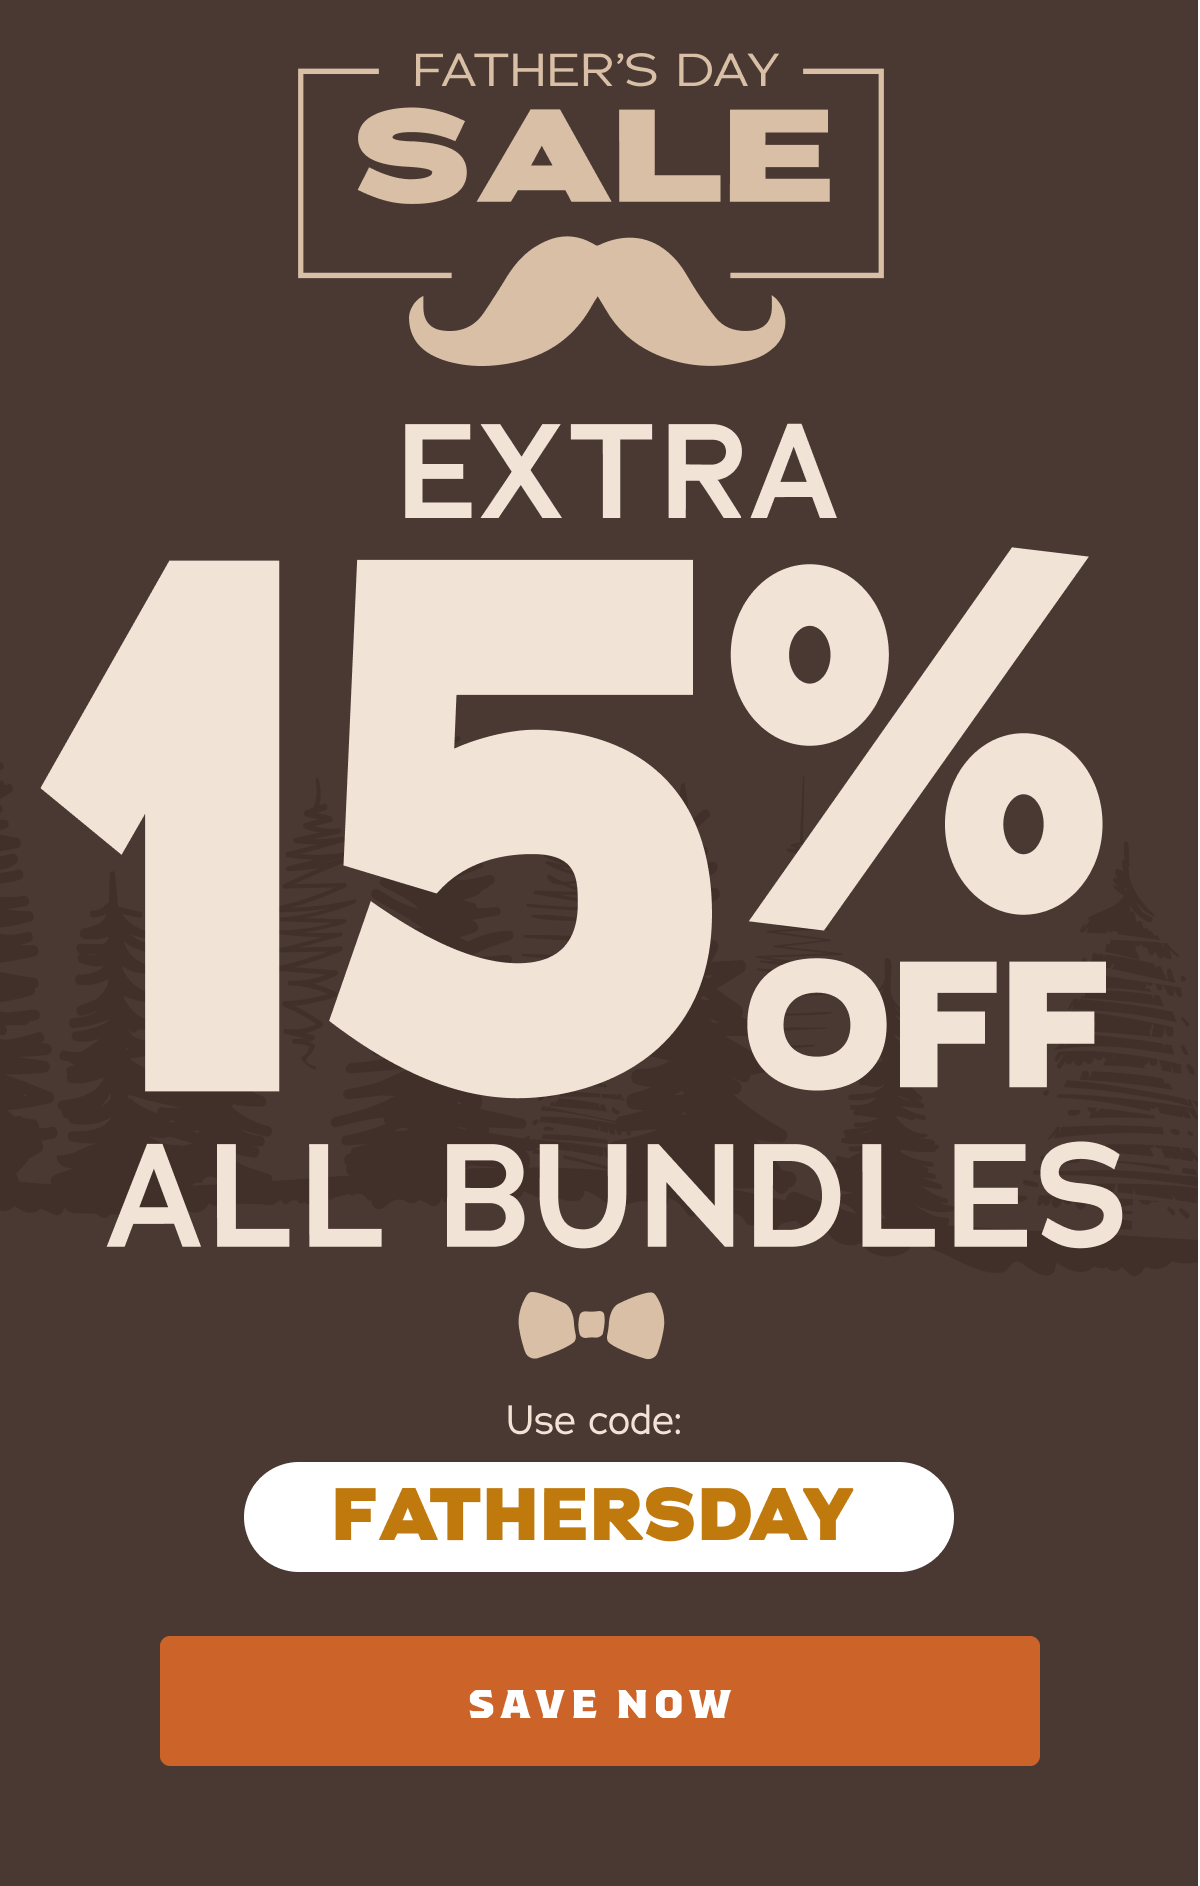 Dr. Squatch Father's Day Bundles Are Gifts That Dads Can Use Every